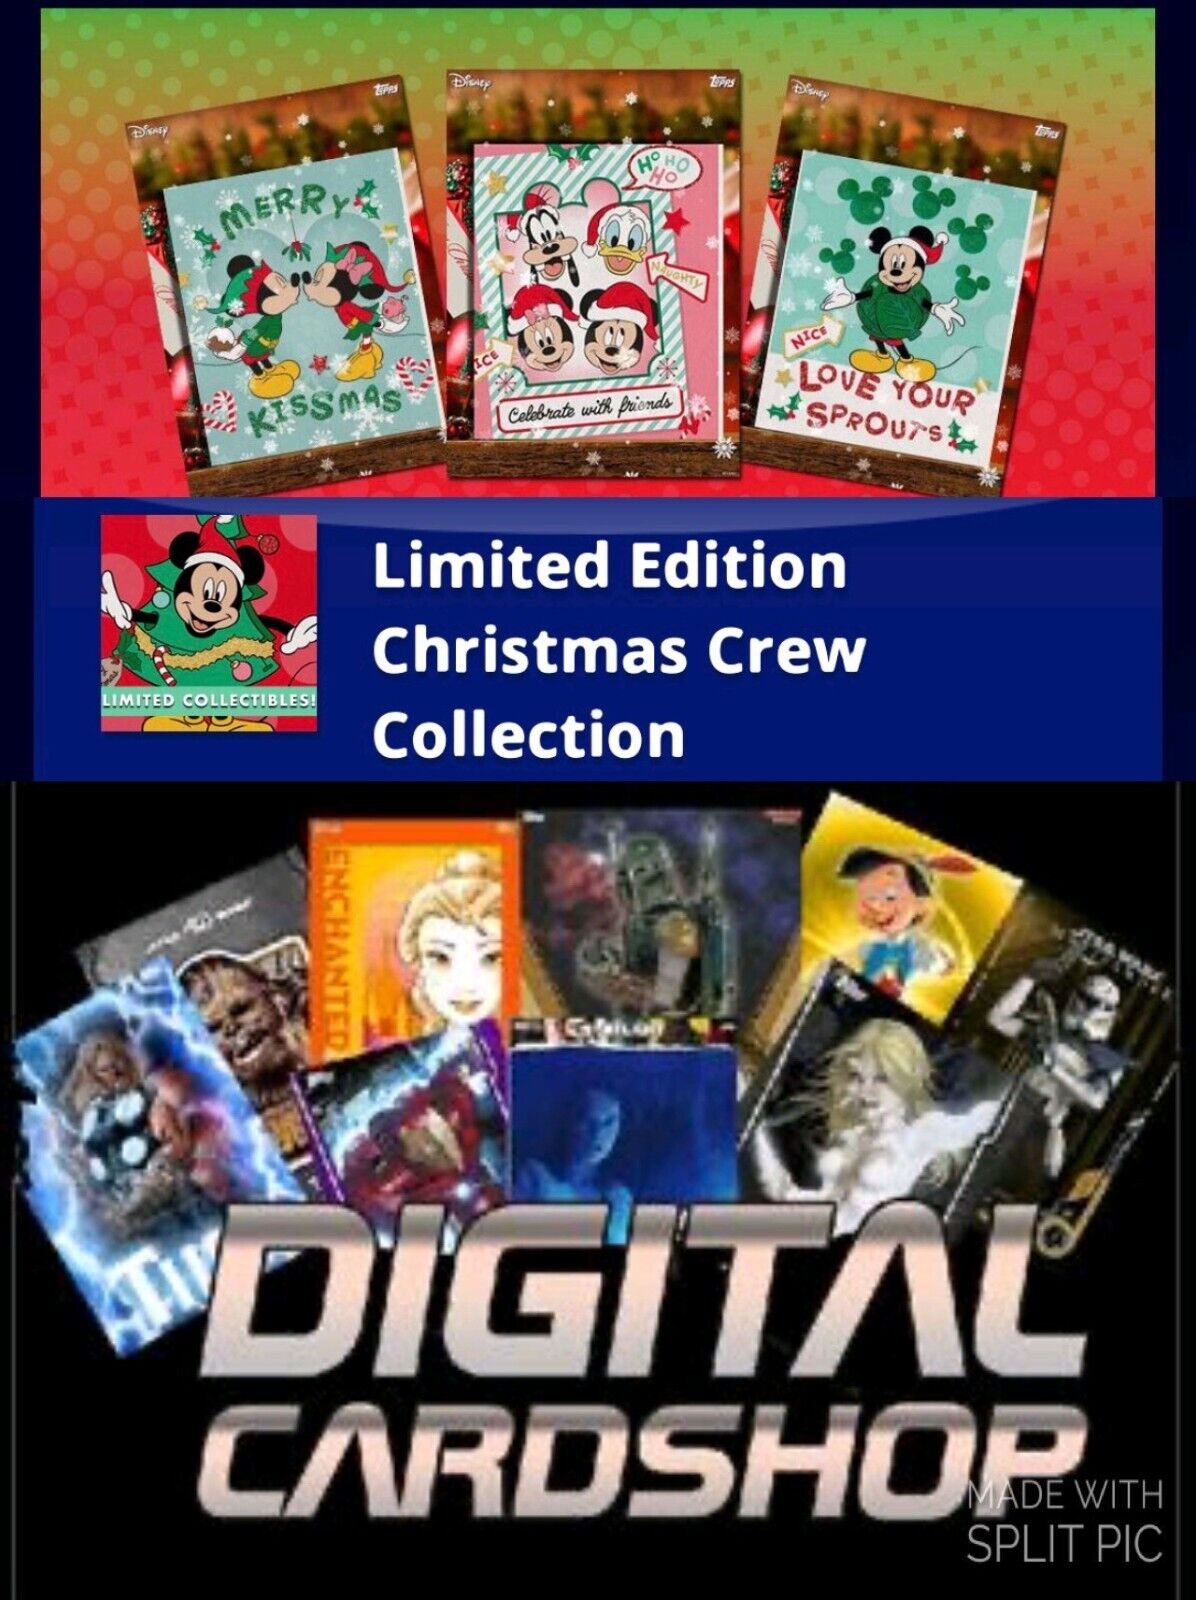 Topps Disney Collect Christmas Crew Collection Motion Limited Edition 8 Card Set